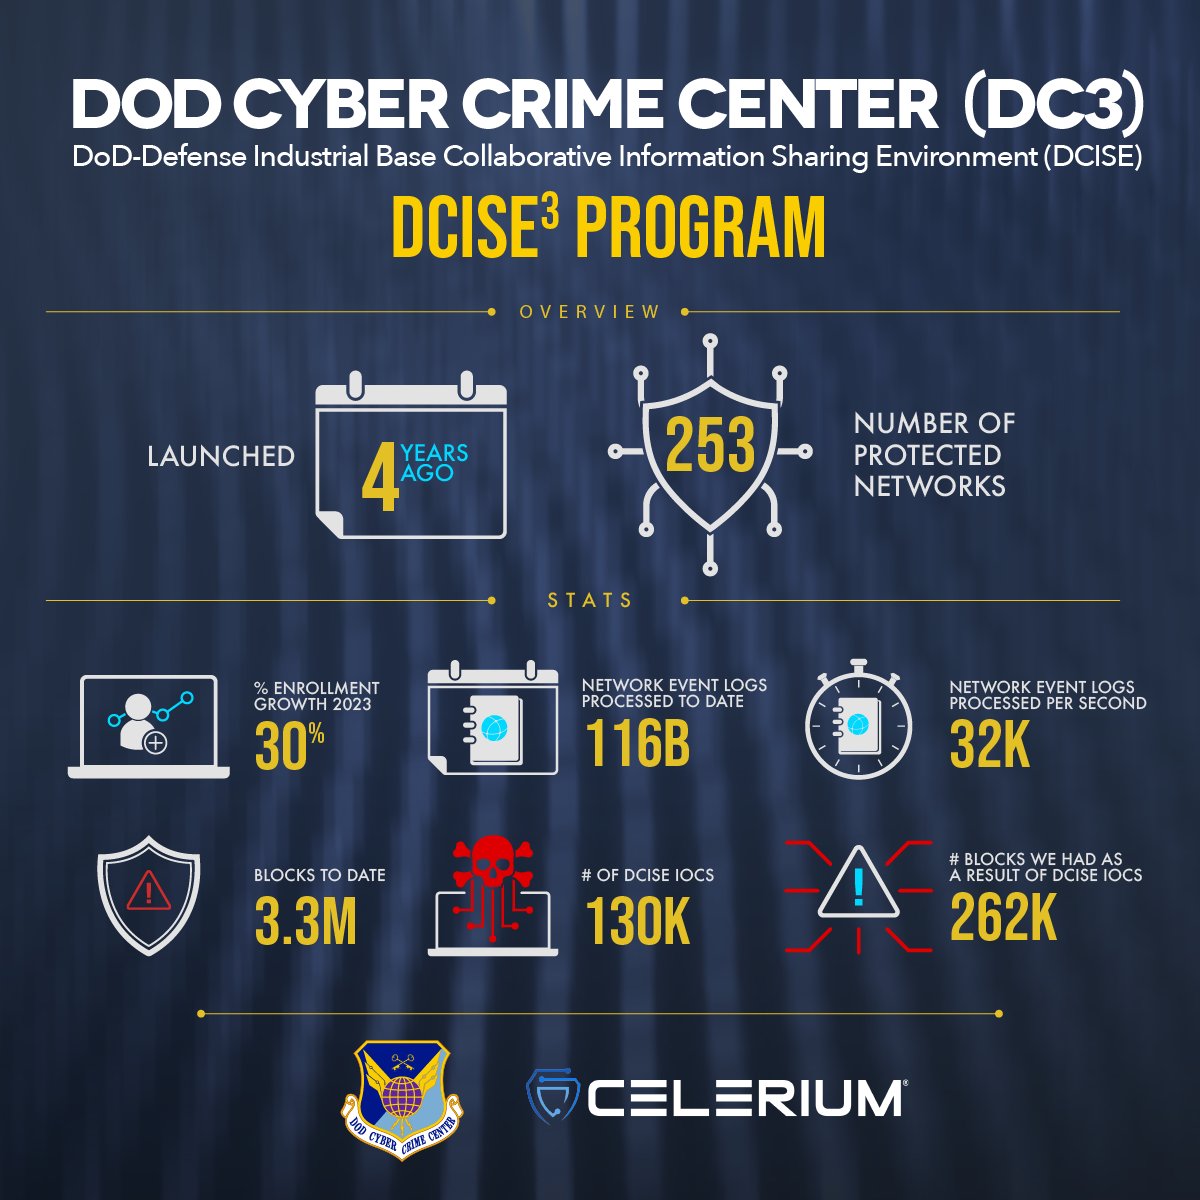 #DIB CS Program Participants: Cybersecurity is a team sport, and with DCISE3, you're never alone. Dive into the DIB CS Program and experience community-driven defense. Email DC3.DCISE@us.af.mil for more info!
#CyberIntelligence #CyberHygiene